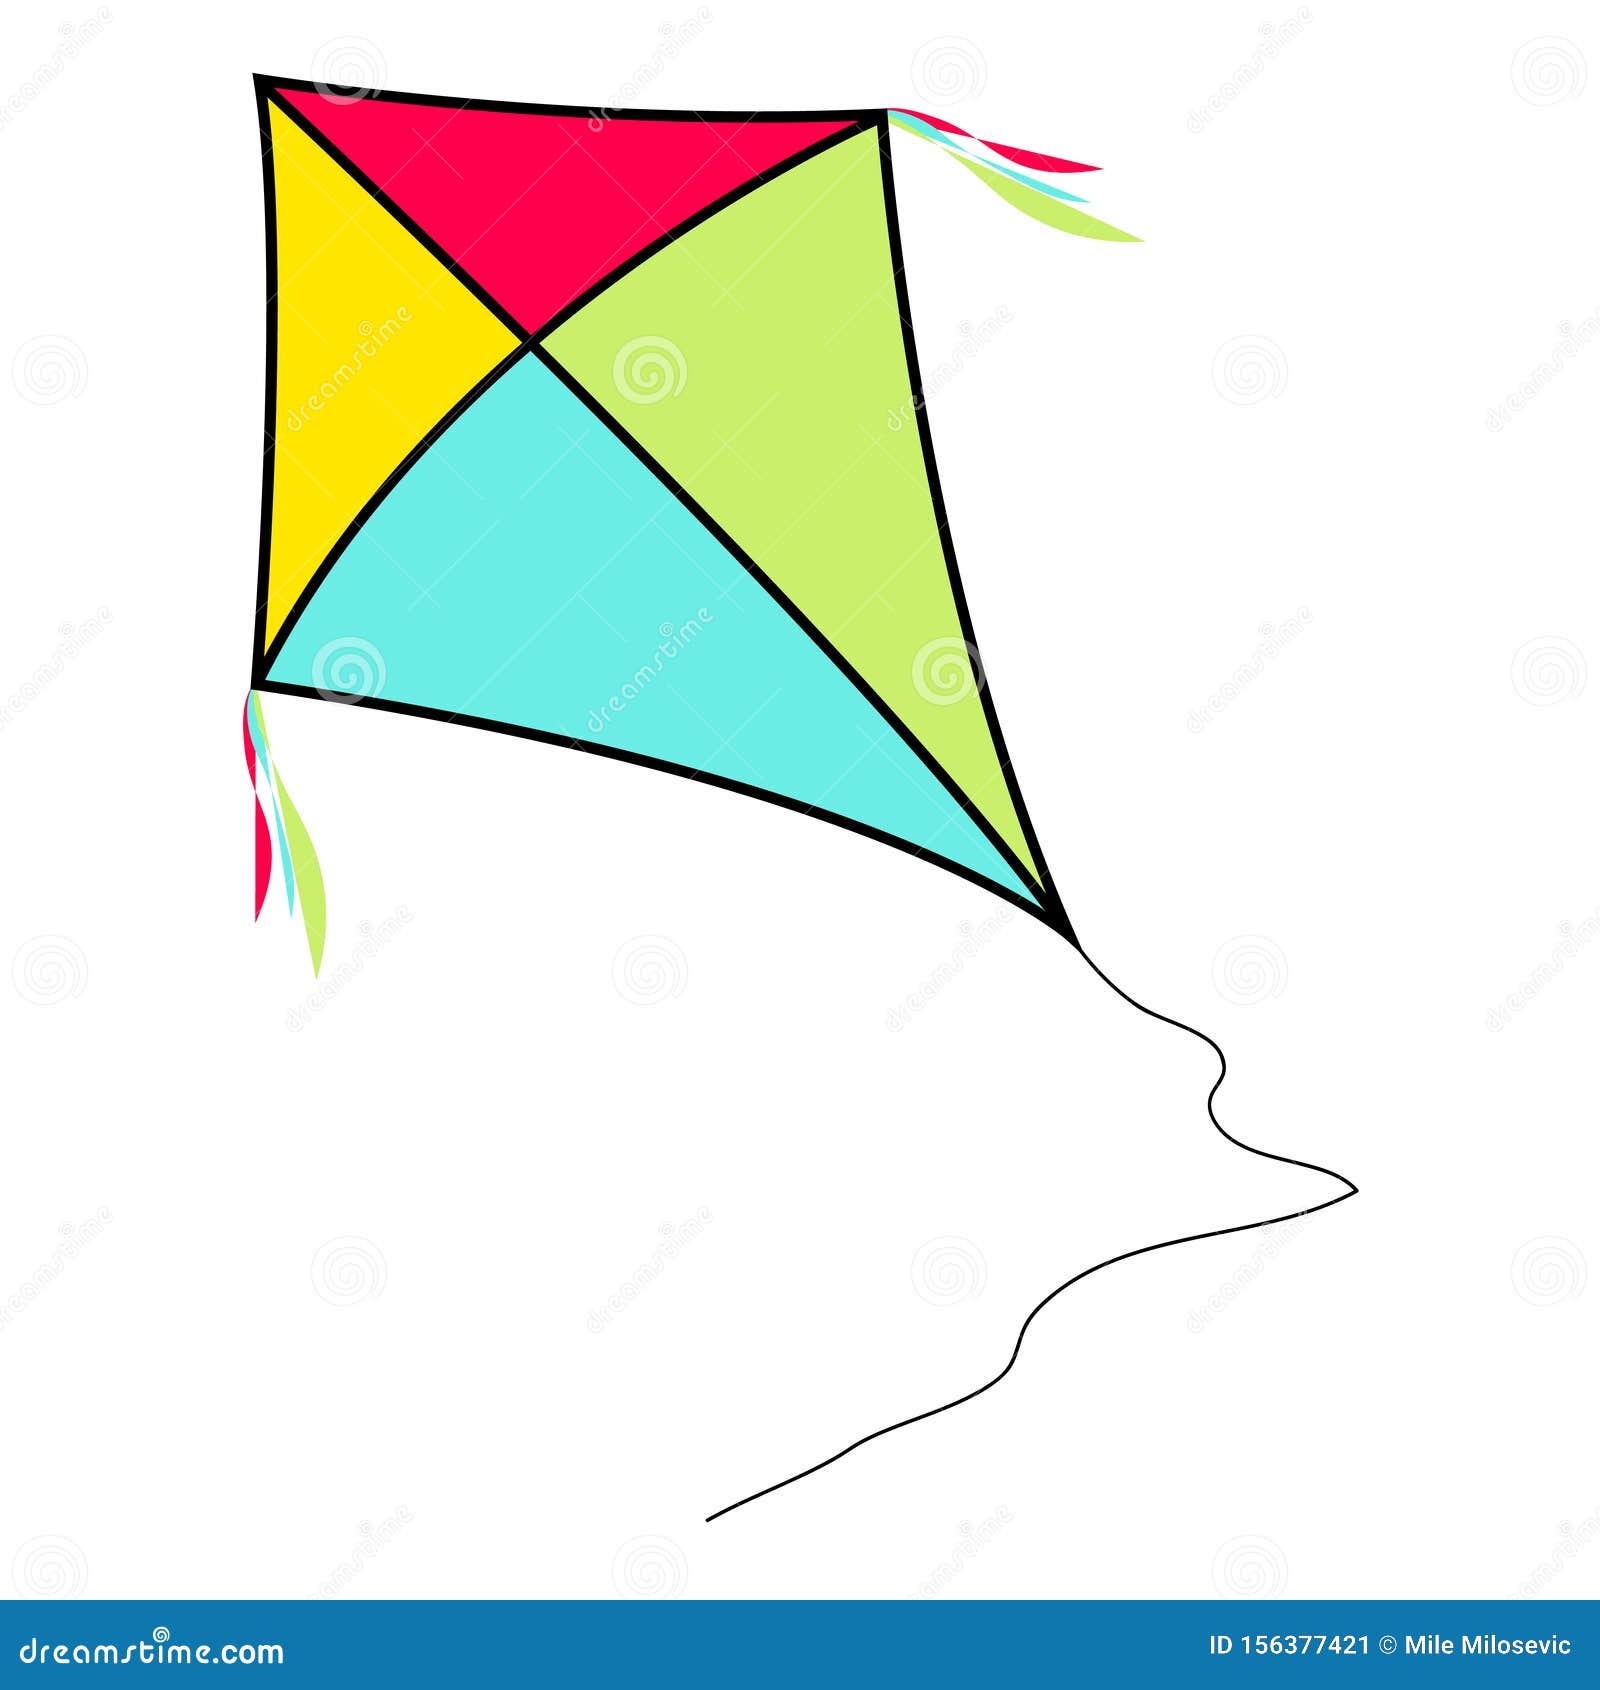 Colorful Fly Kite on White Background Stock Vector - Illustration ...